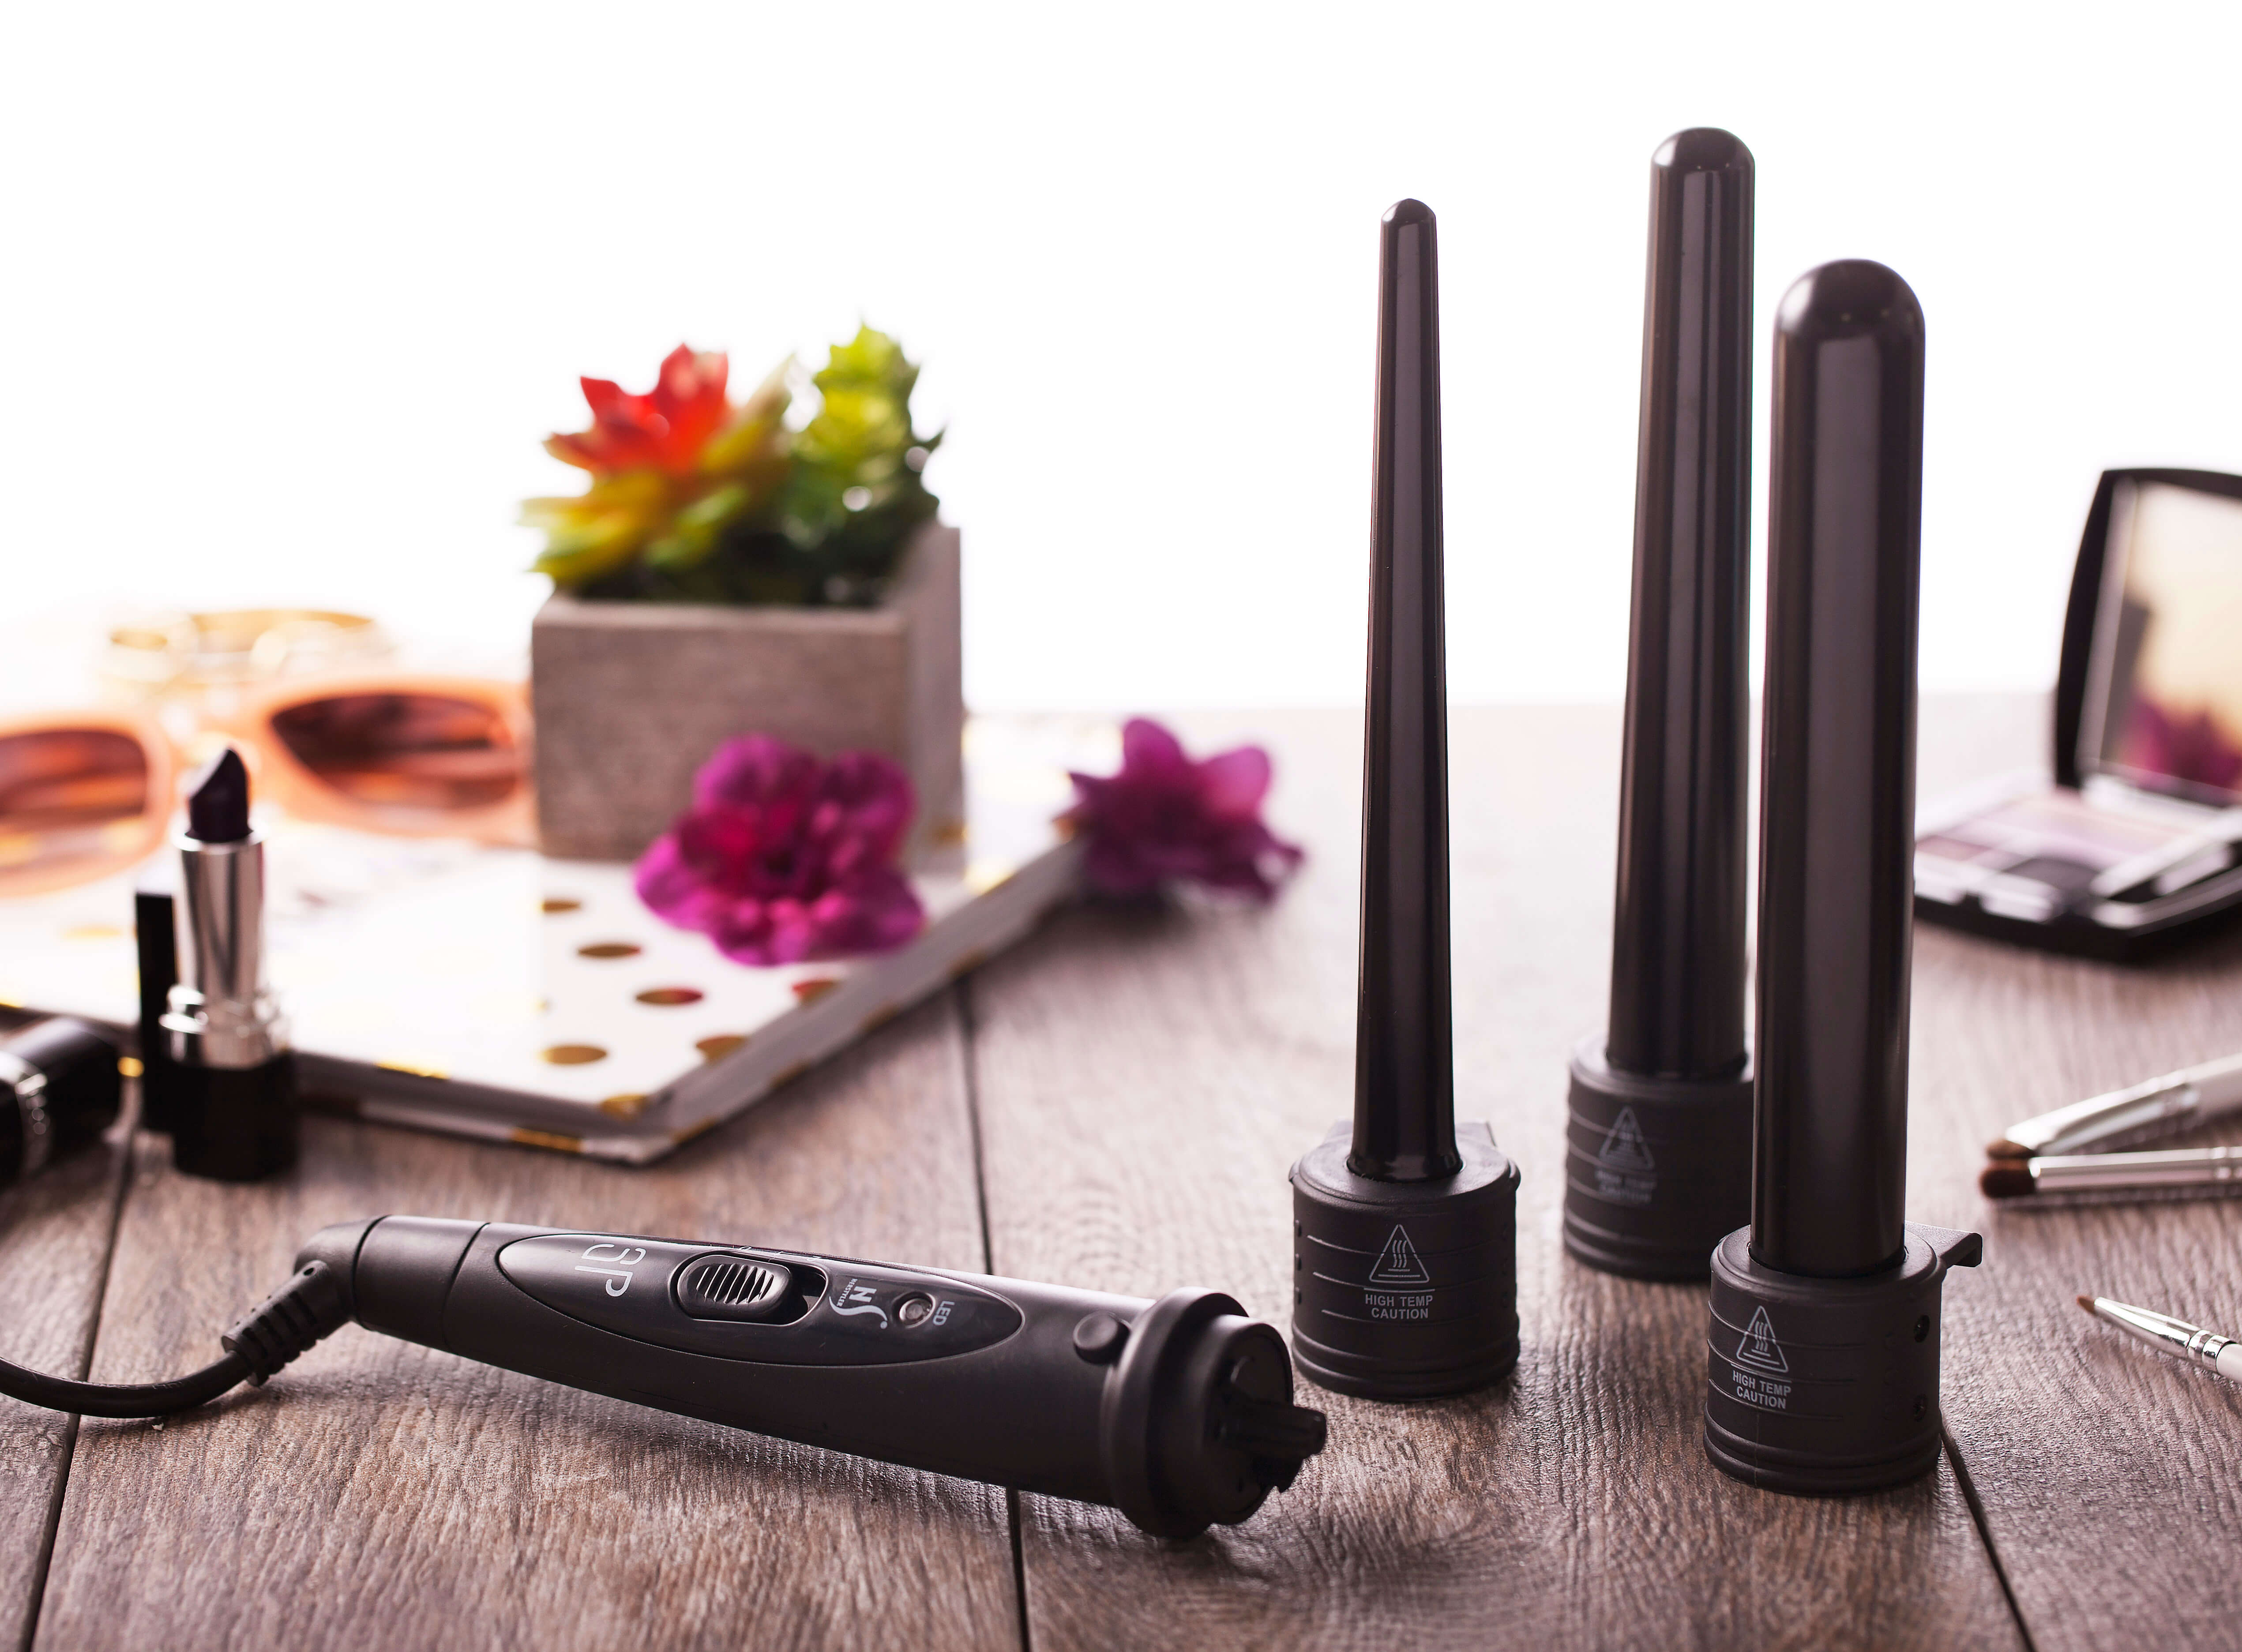 Product Review: Curling Irons by Herstyler